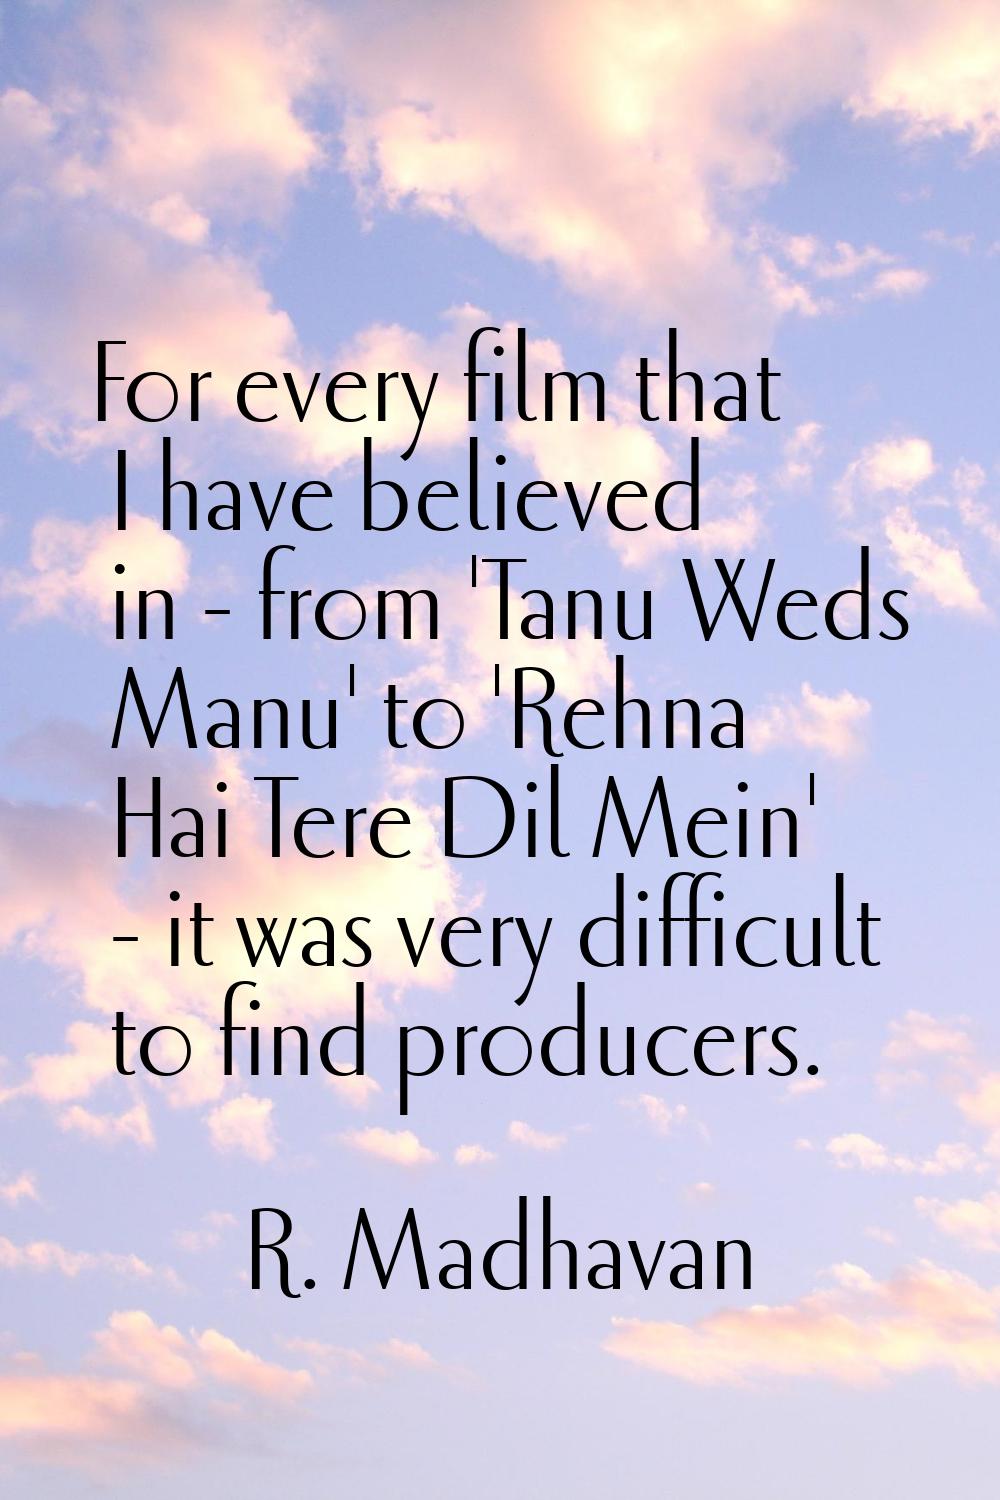 For every film that I have believed in - from 'Tanu Weds Manu' to 'Rehna Hai Tere Dil Mein' - it wa